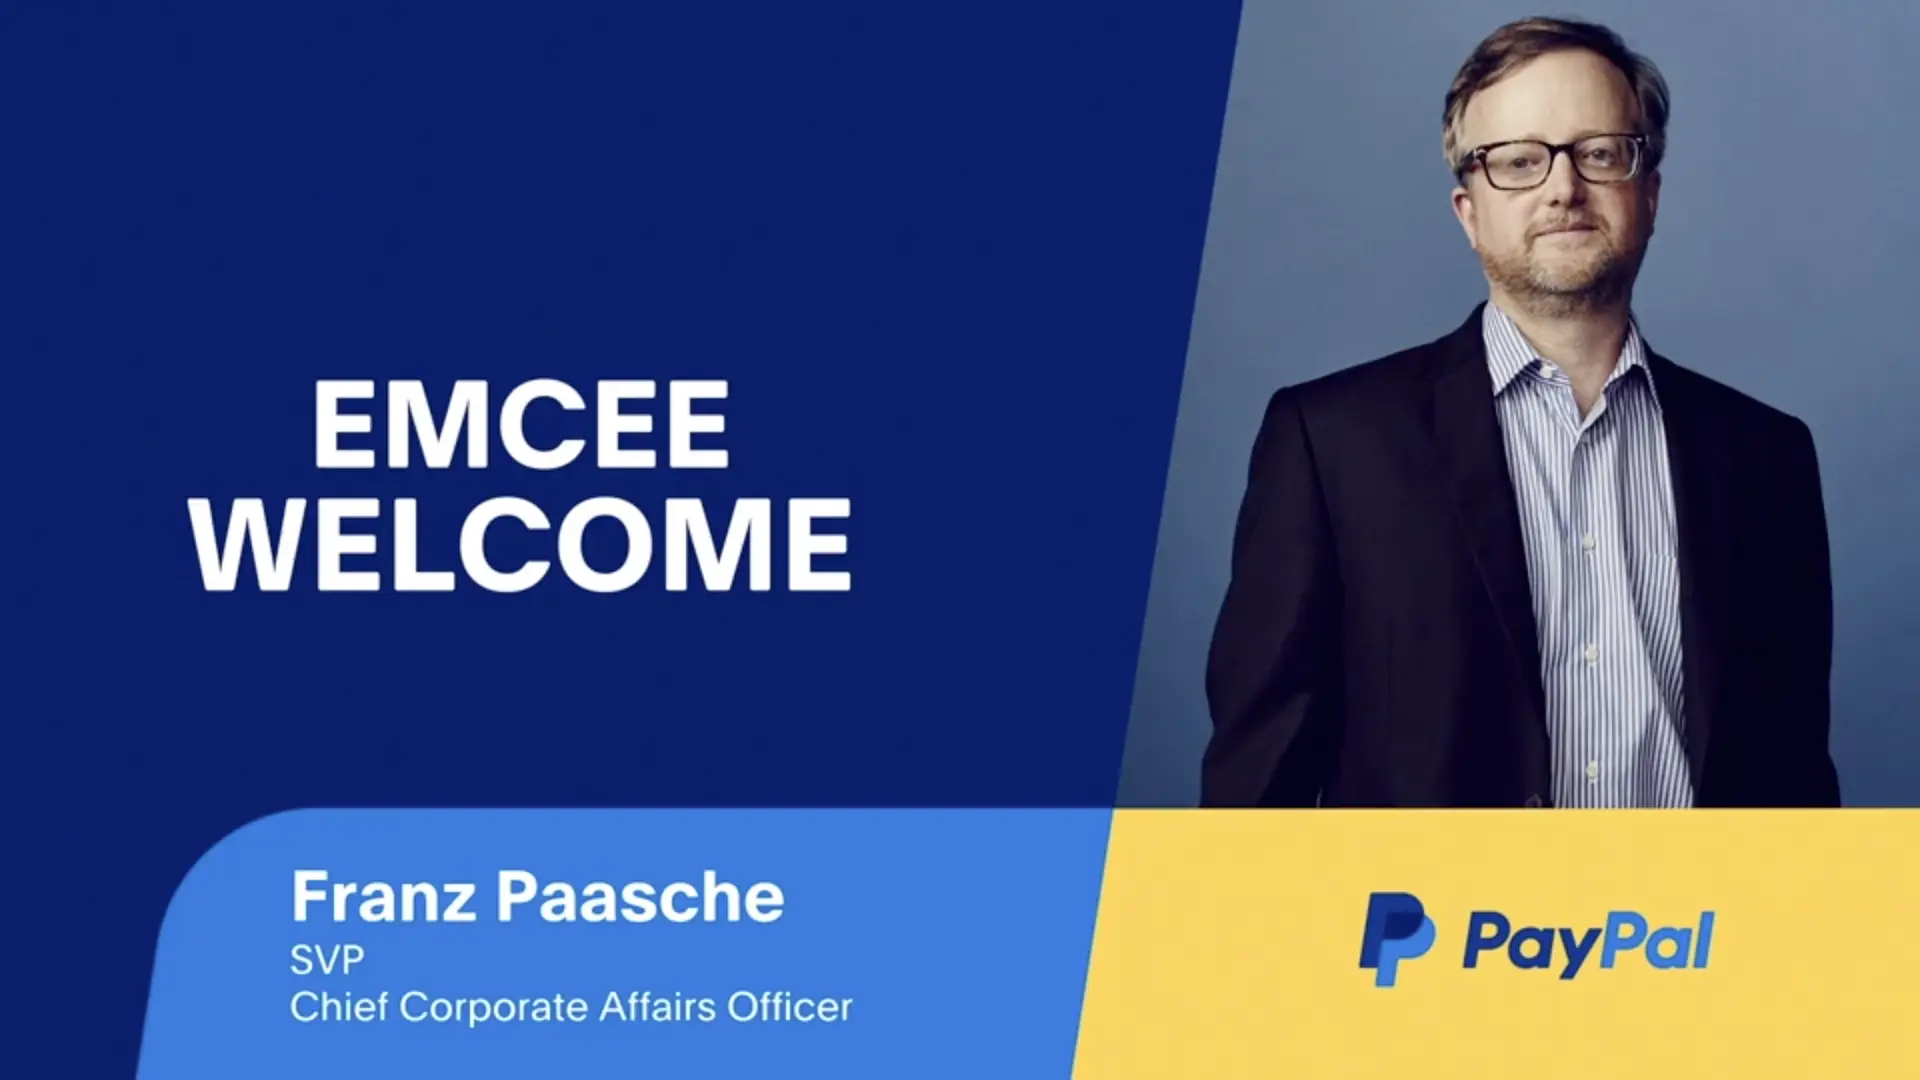 Emee welcomes Franz to work at PayPal.